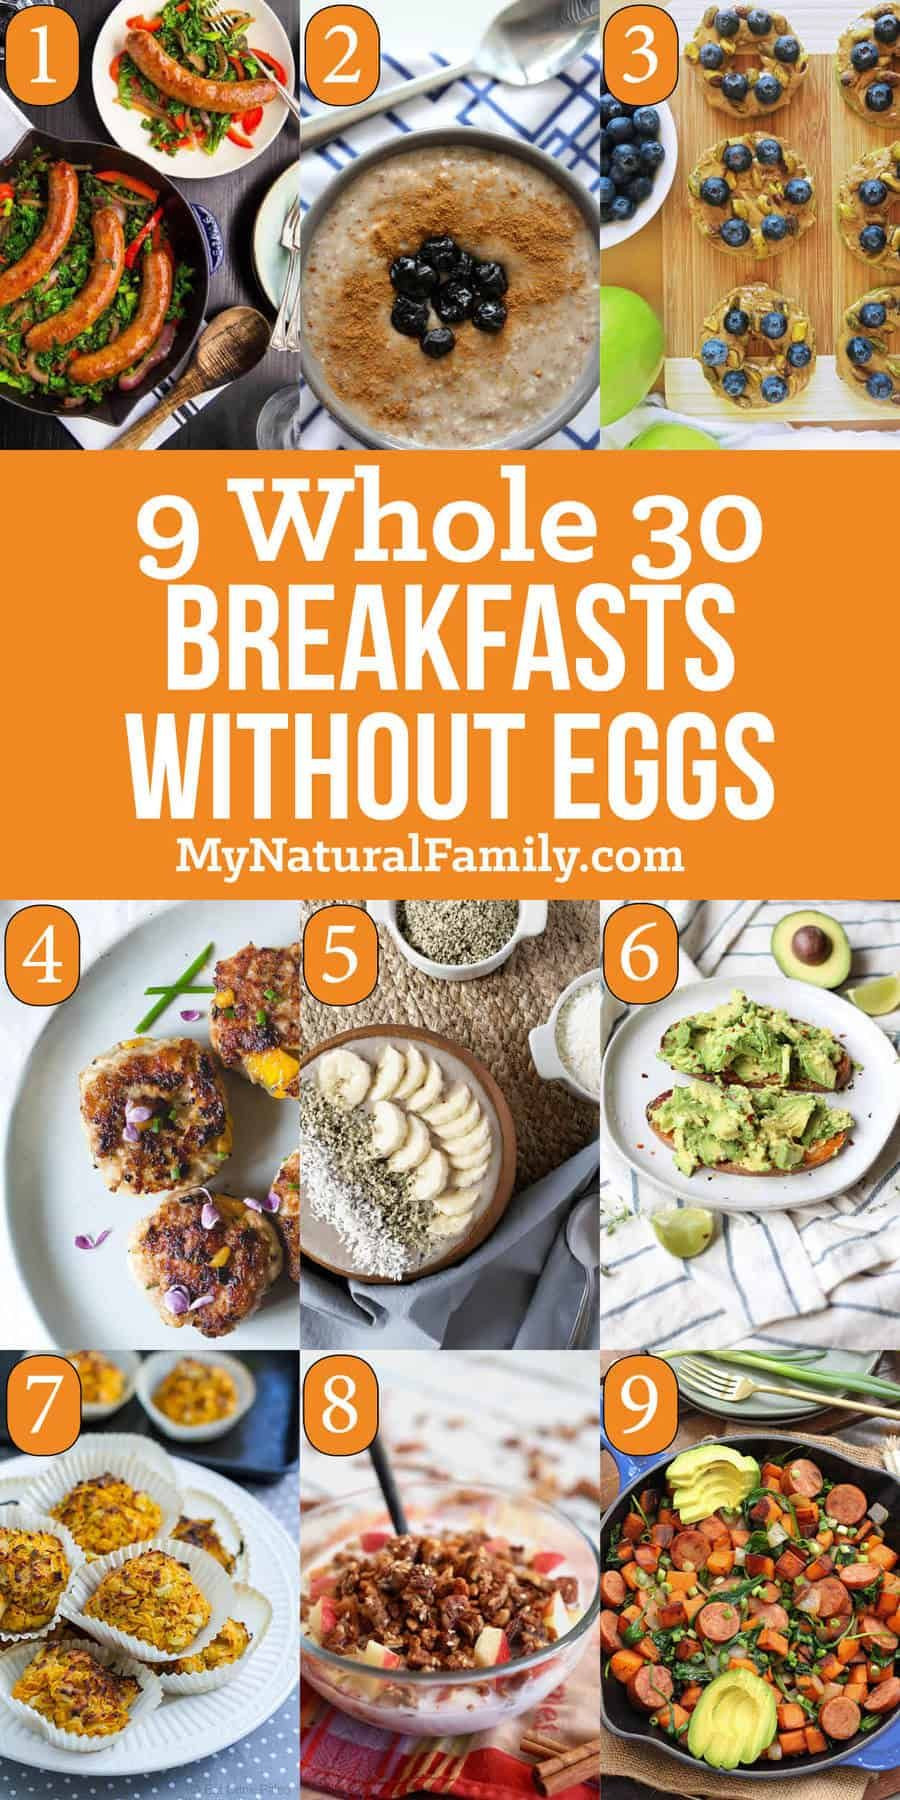 Whole30 Breakfast without Eggs Luxury whole30 Breakfast without Eggs Via Mynaturalfamily